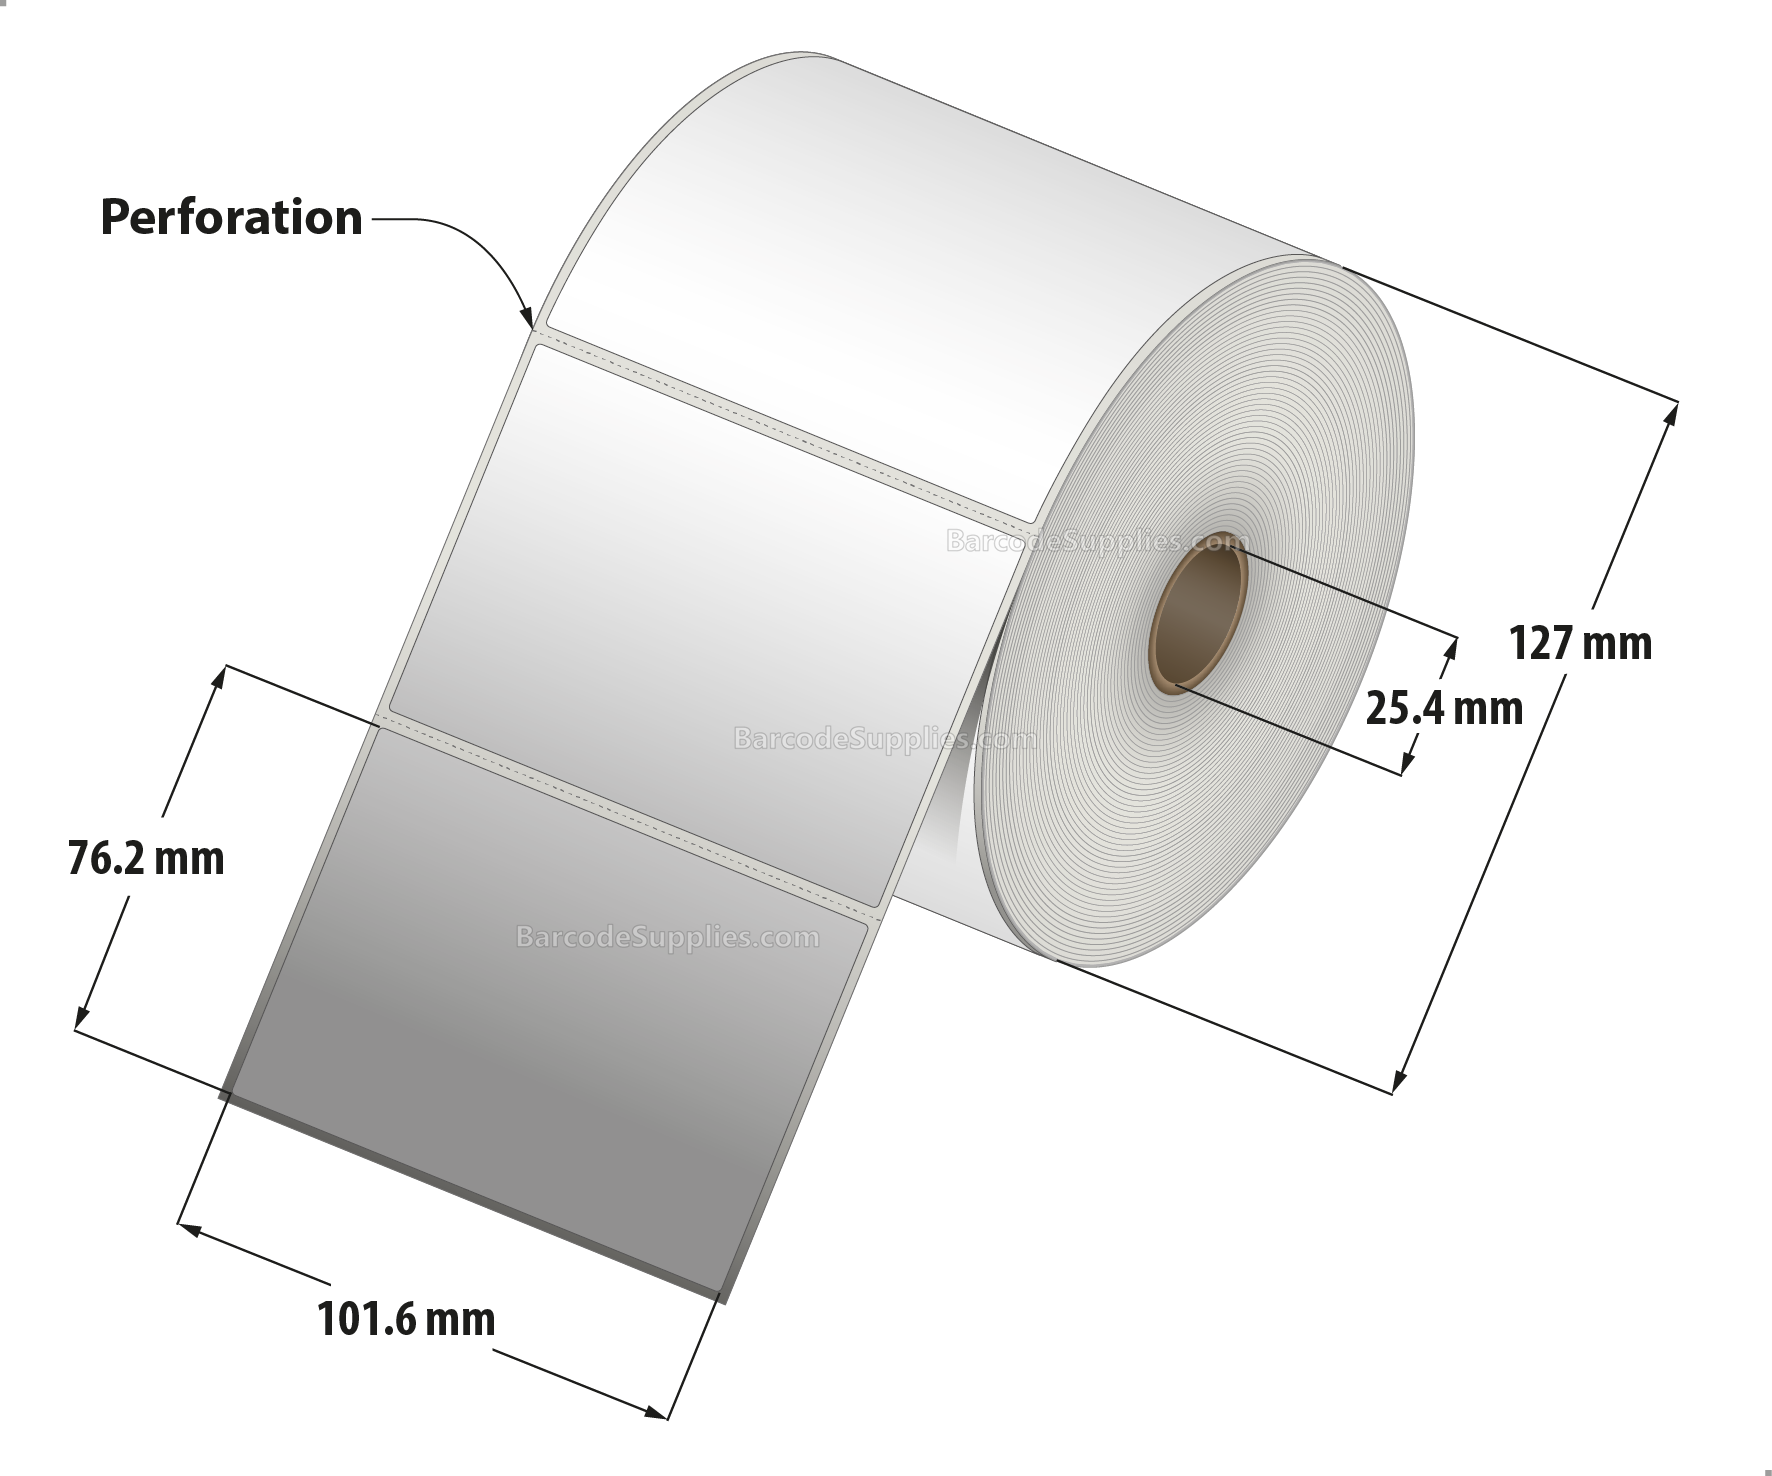 4 x 3 Direct Thermal White Labels With Rubber Adhesive - Perforated - 840 Labels Per Roll - Carton Of 12 Rolls - 10080 Labels Total - MPN: RDT5-400300-1P